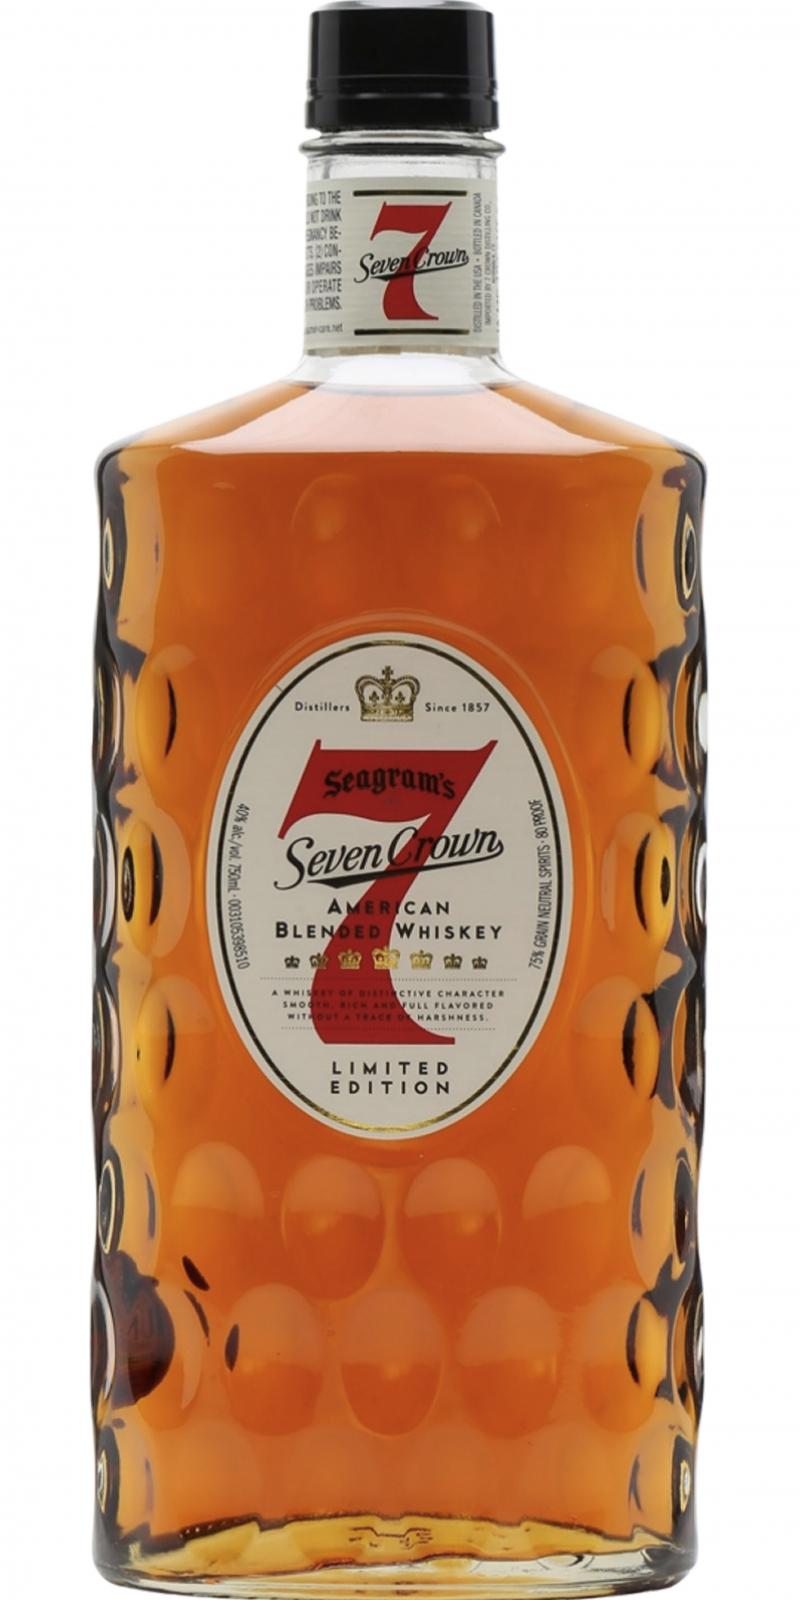 Seagram's 7 Crown Limited Edition Retro Bottle 40% 750ml